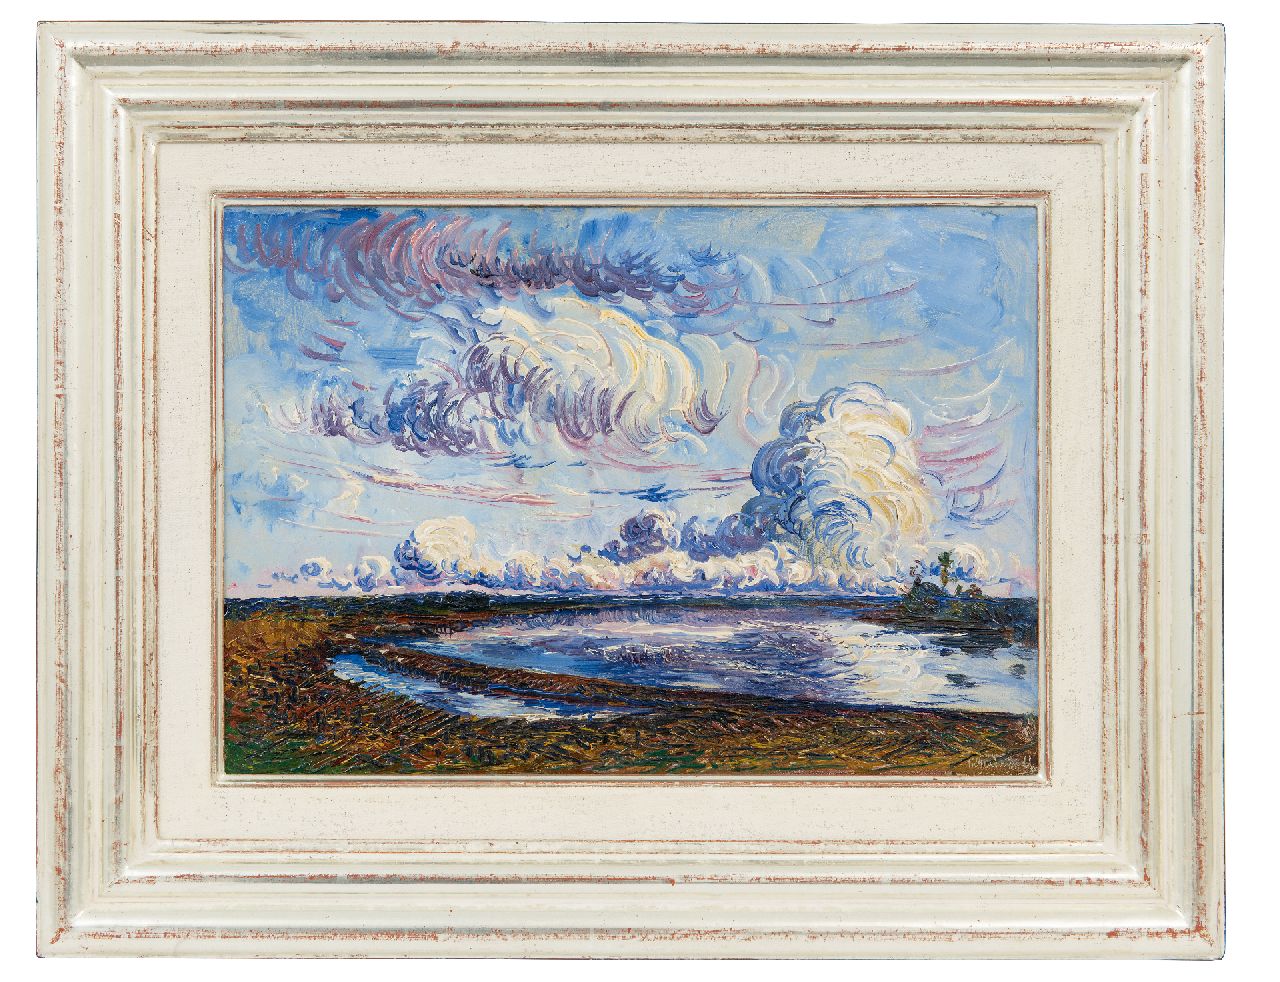 Goedvriend Th.F.  | Theodoor Franciscus 'Theo' Goedvriend, Clouds over a polder landscape, oil on painter's board 25.5 x 36.3 cm, signed l.r.